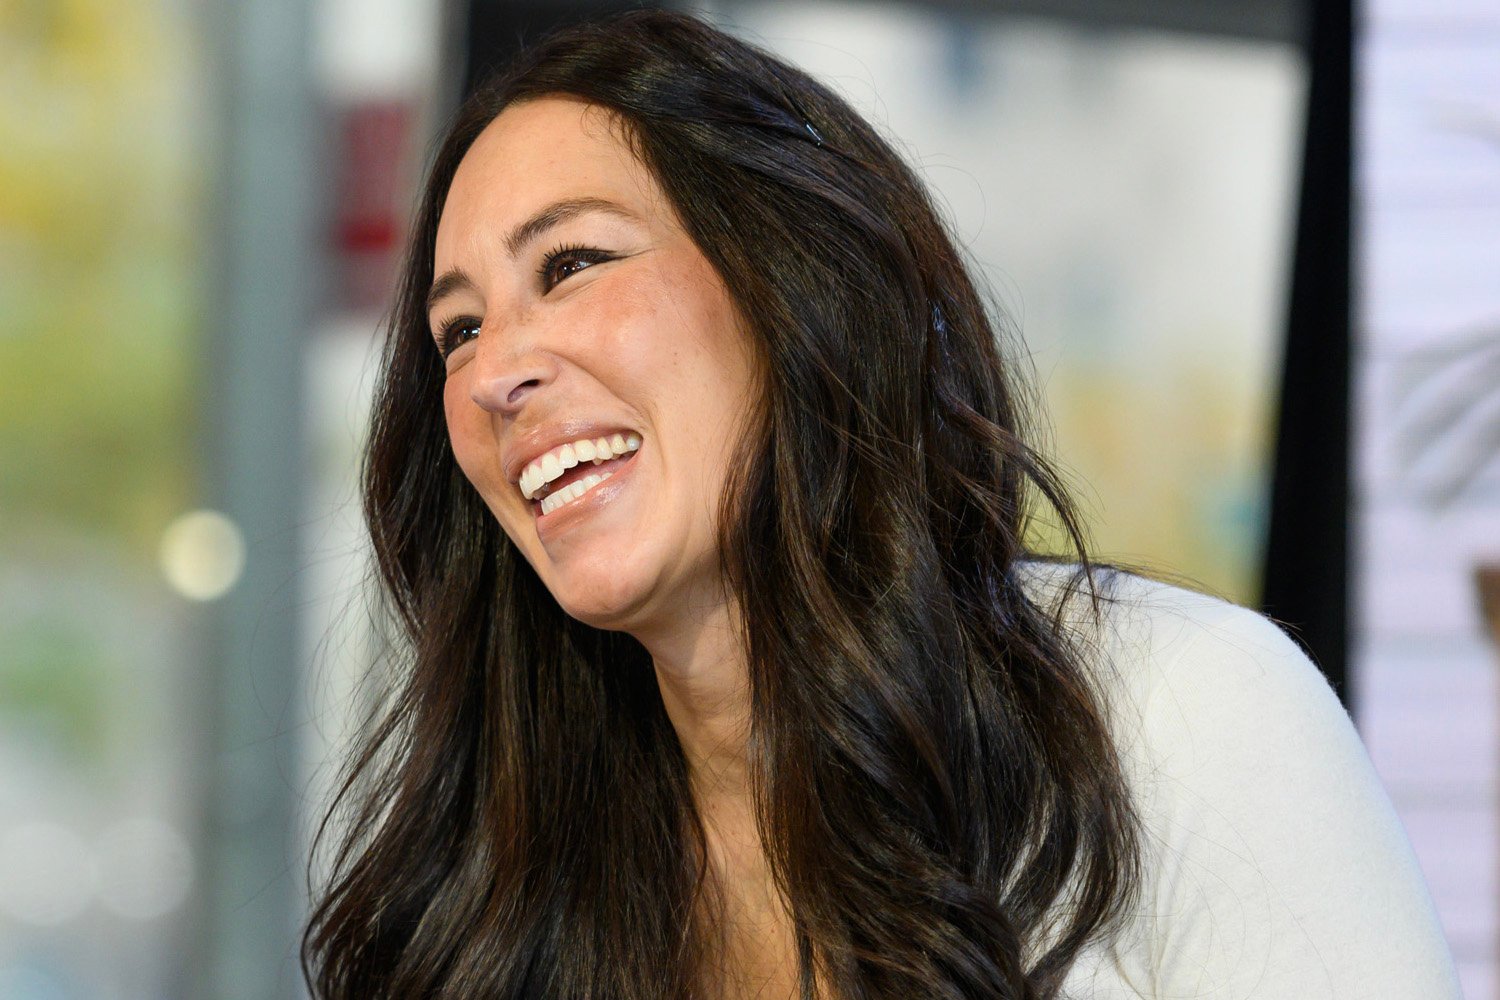 Joanna Gaines during an interview in 2018